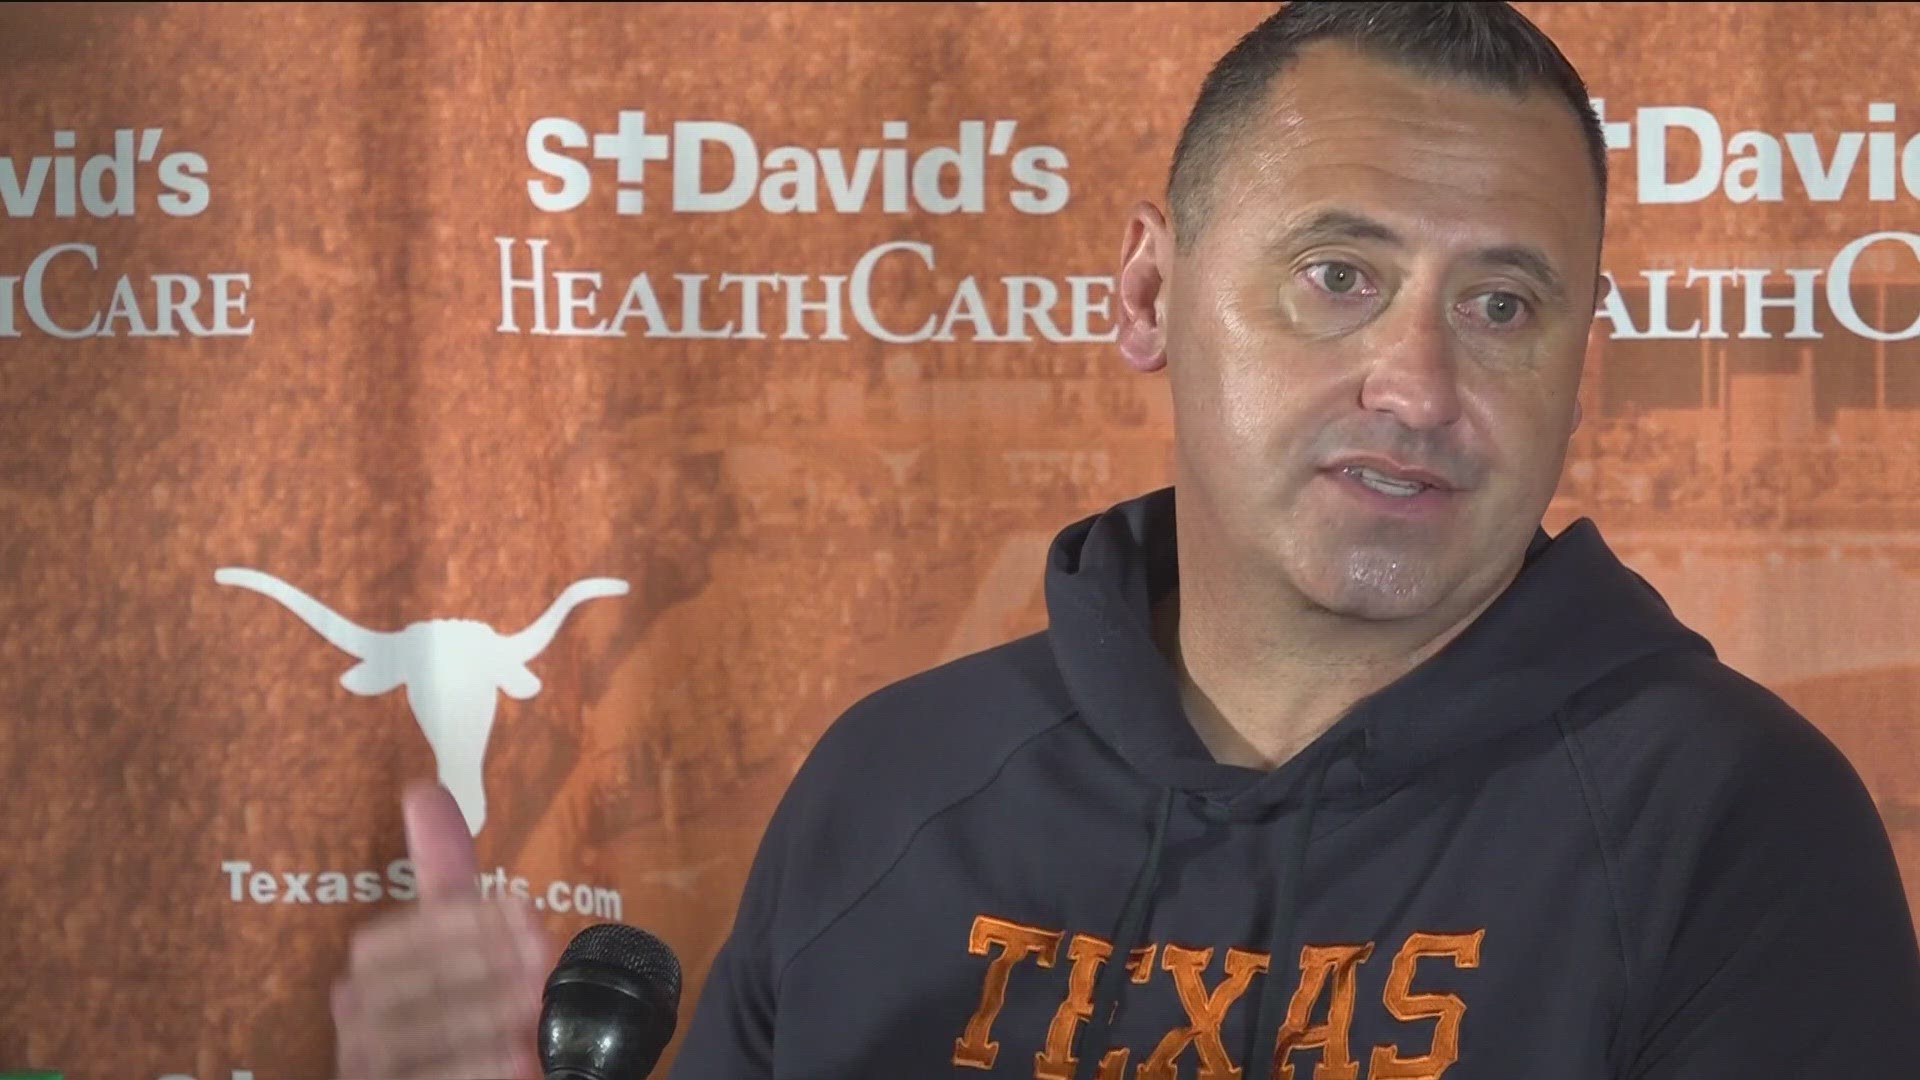 Steve Sarkisian said the competitiveness at spring practice is really heating up for his Texas football team. He said "culture beats talent."